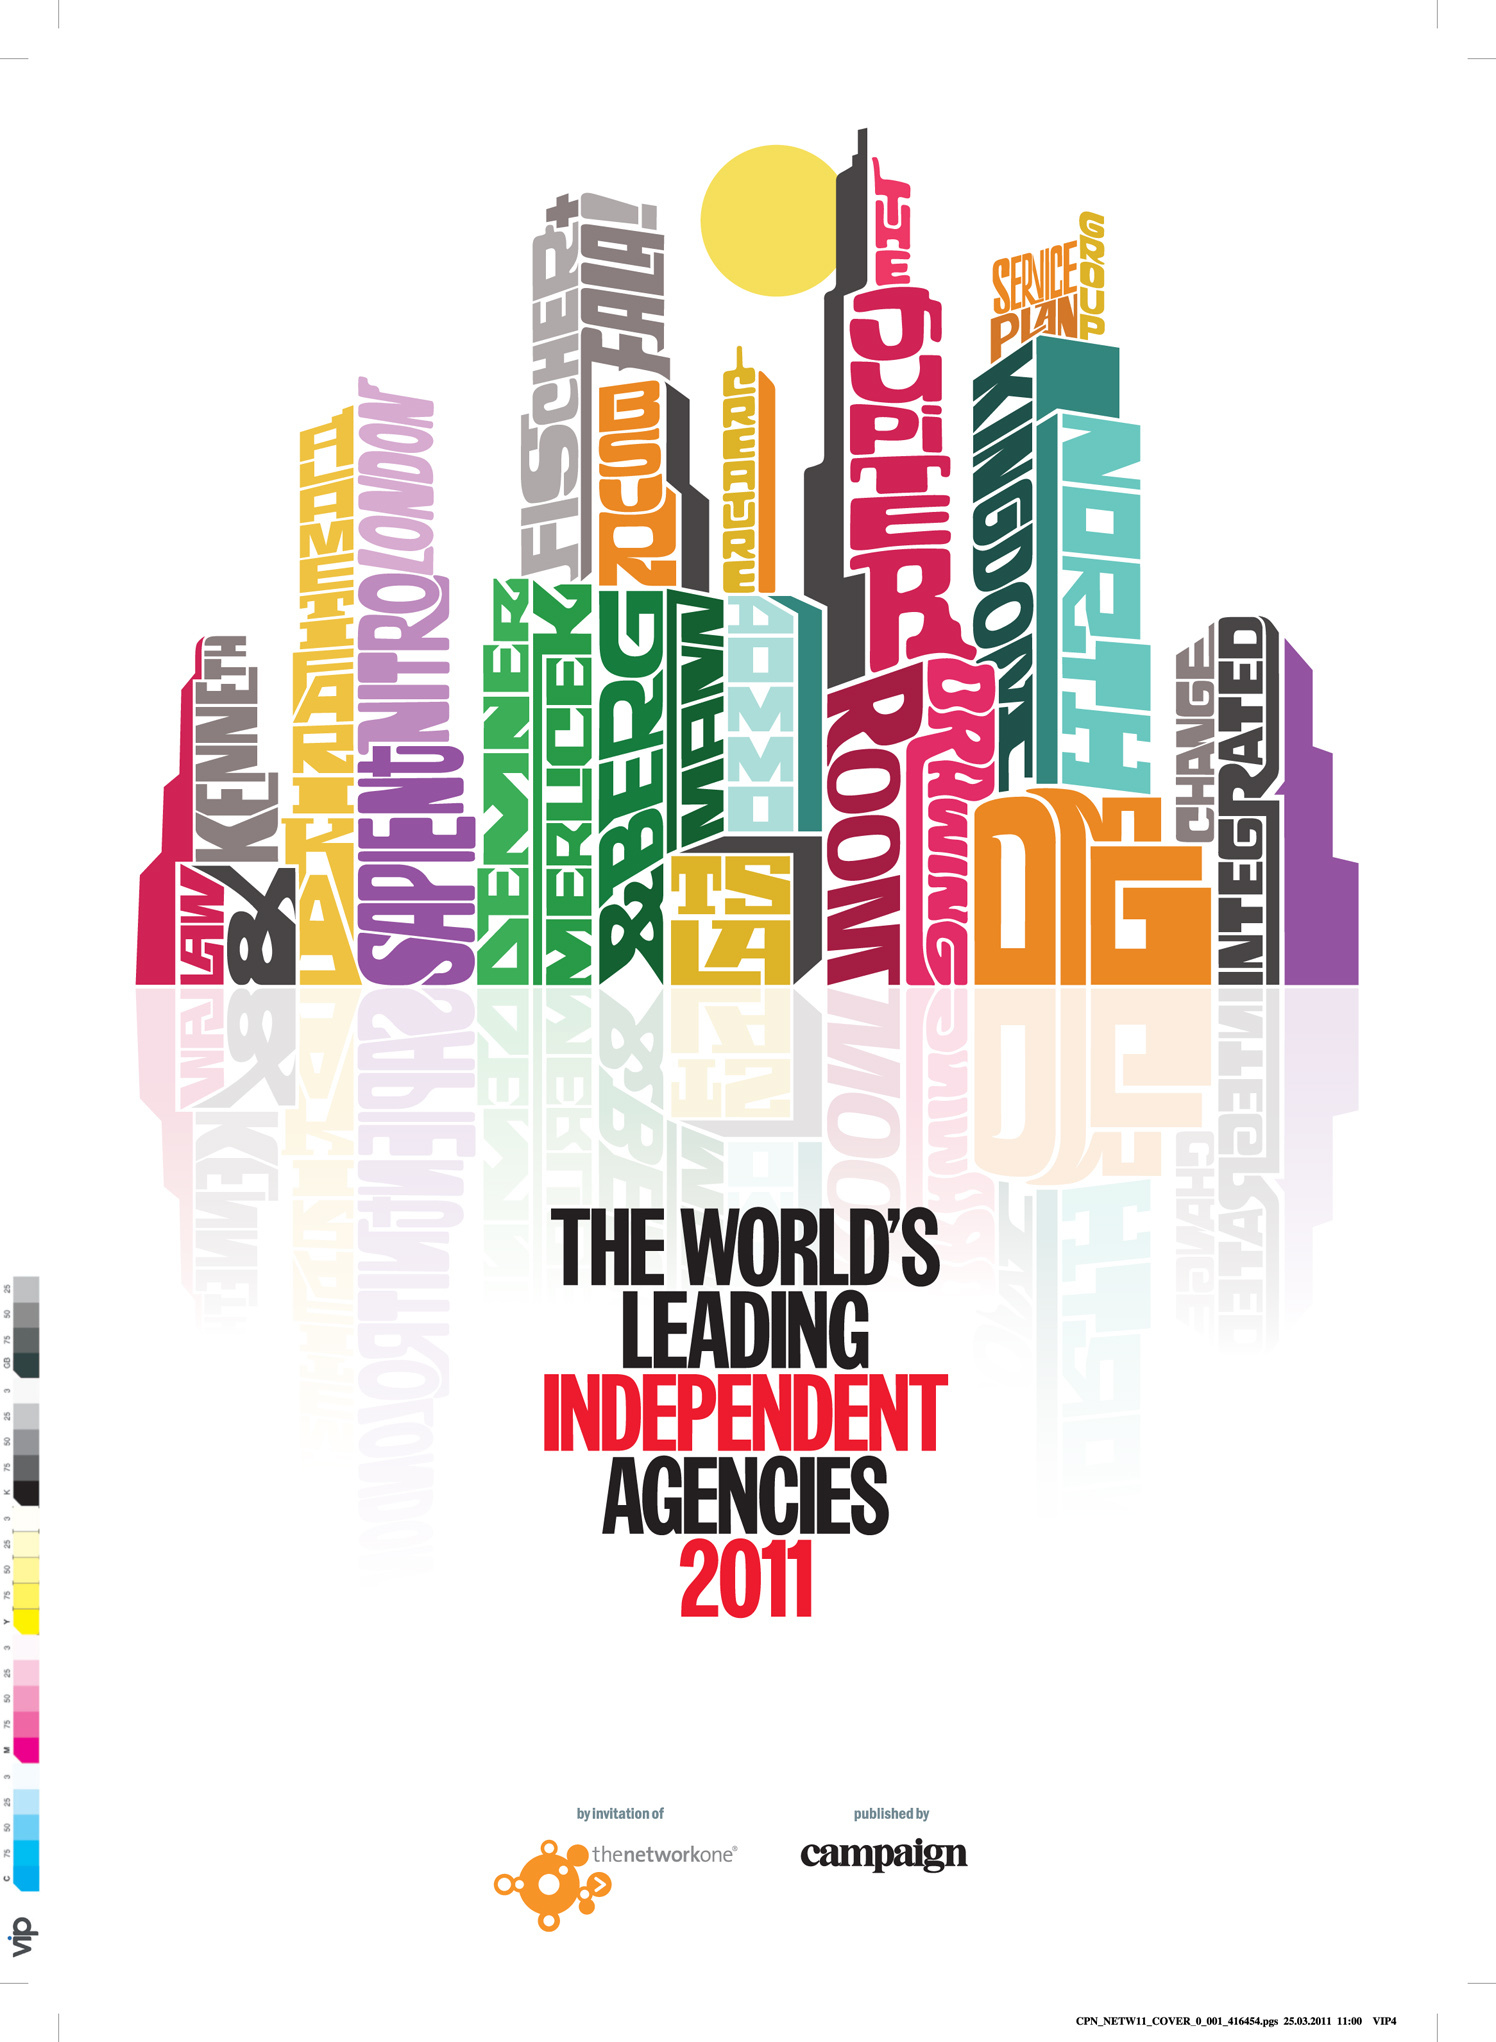 Independent Agencies 2011 Cover / Campaign Magazine